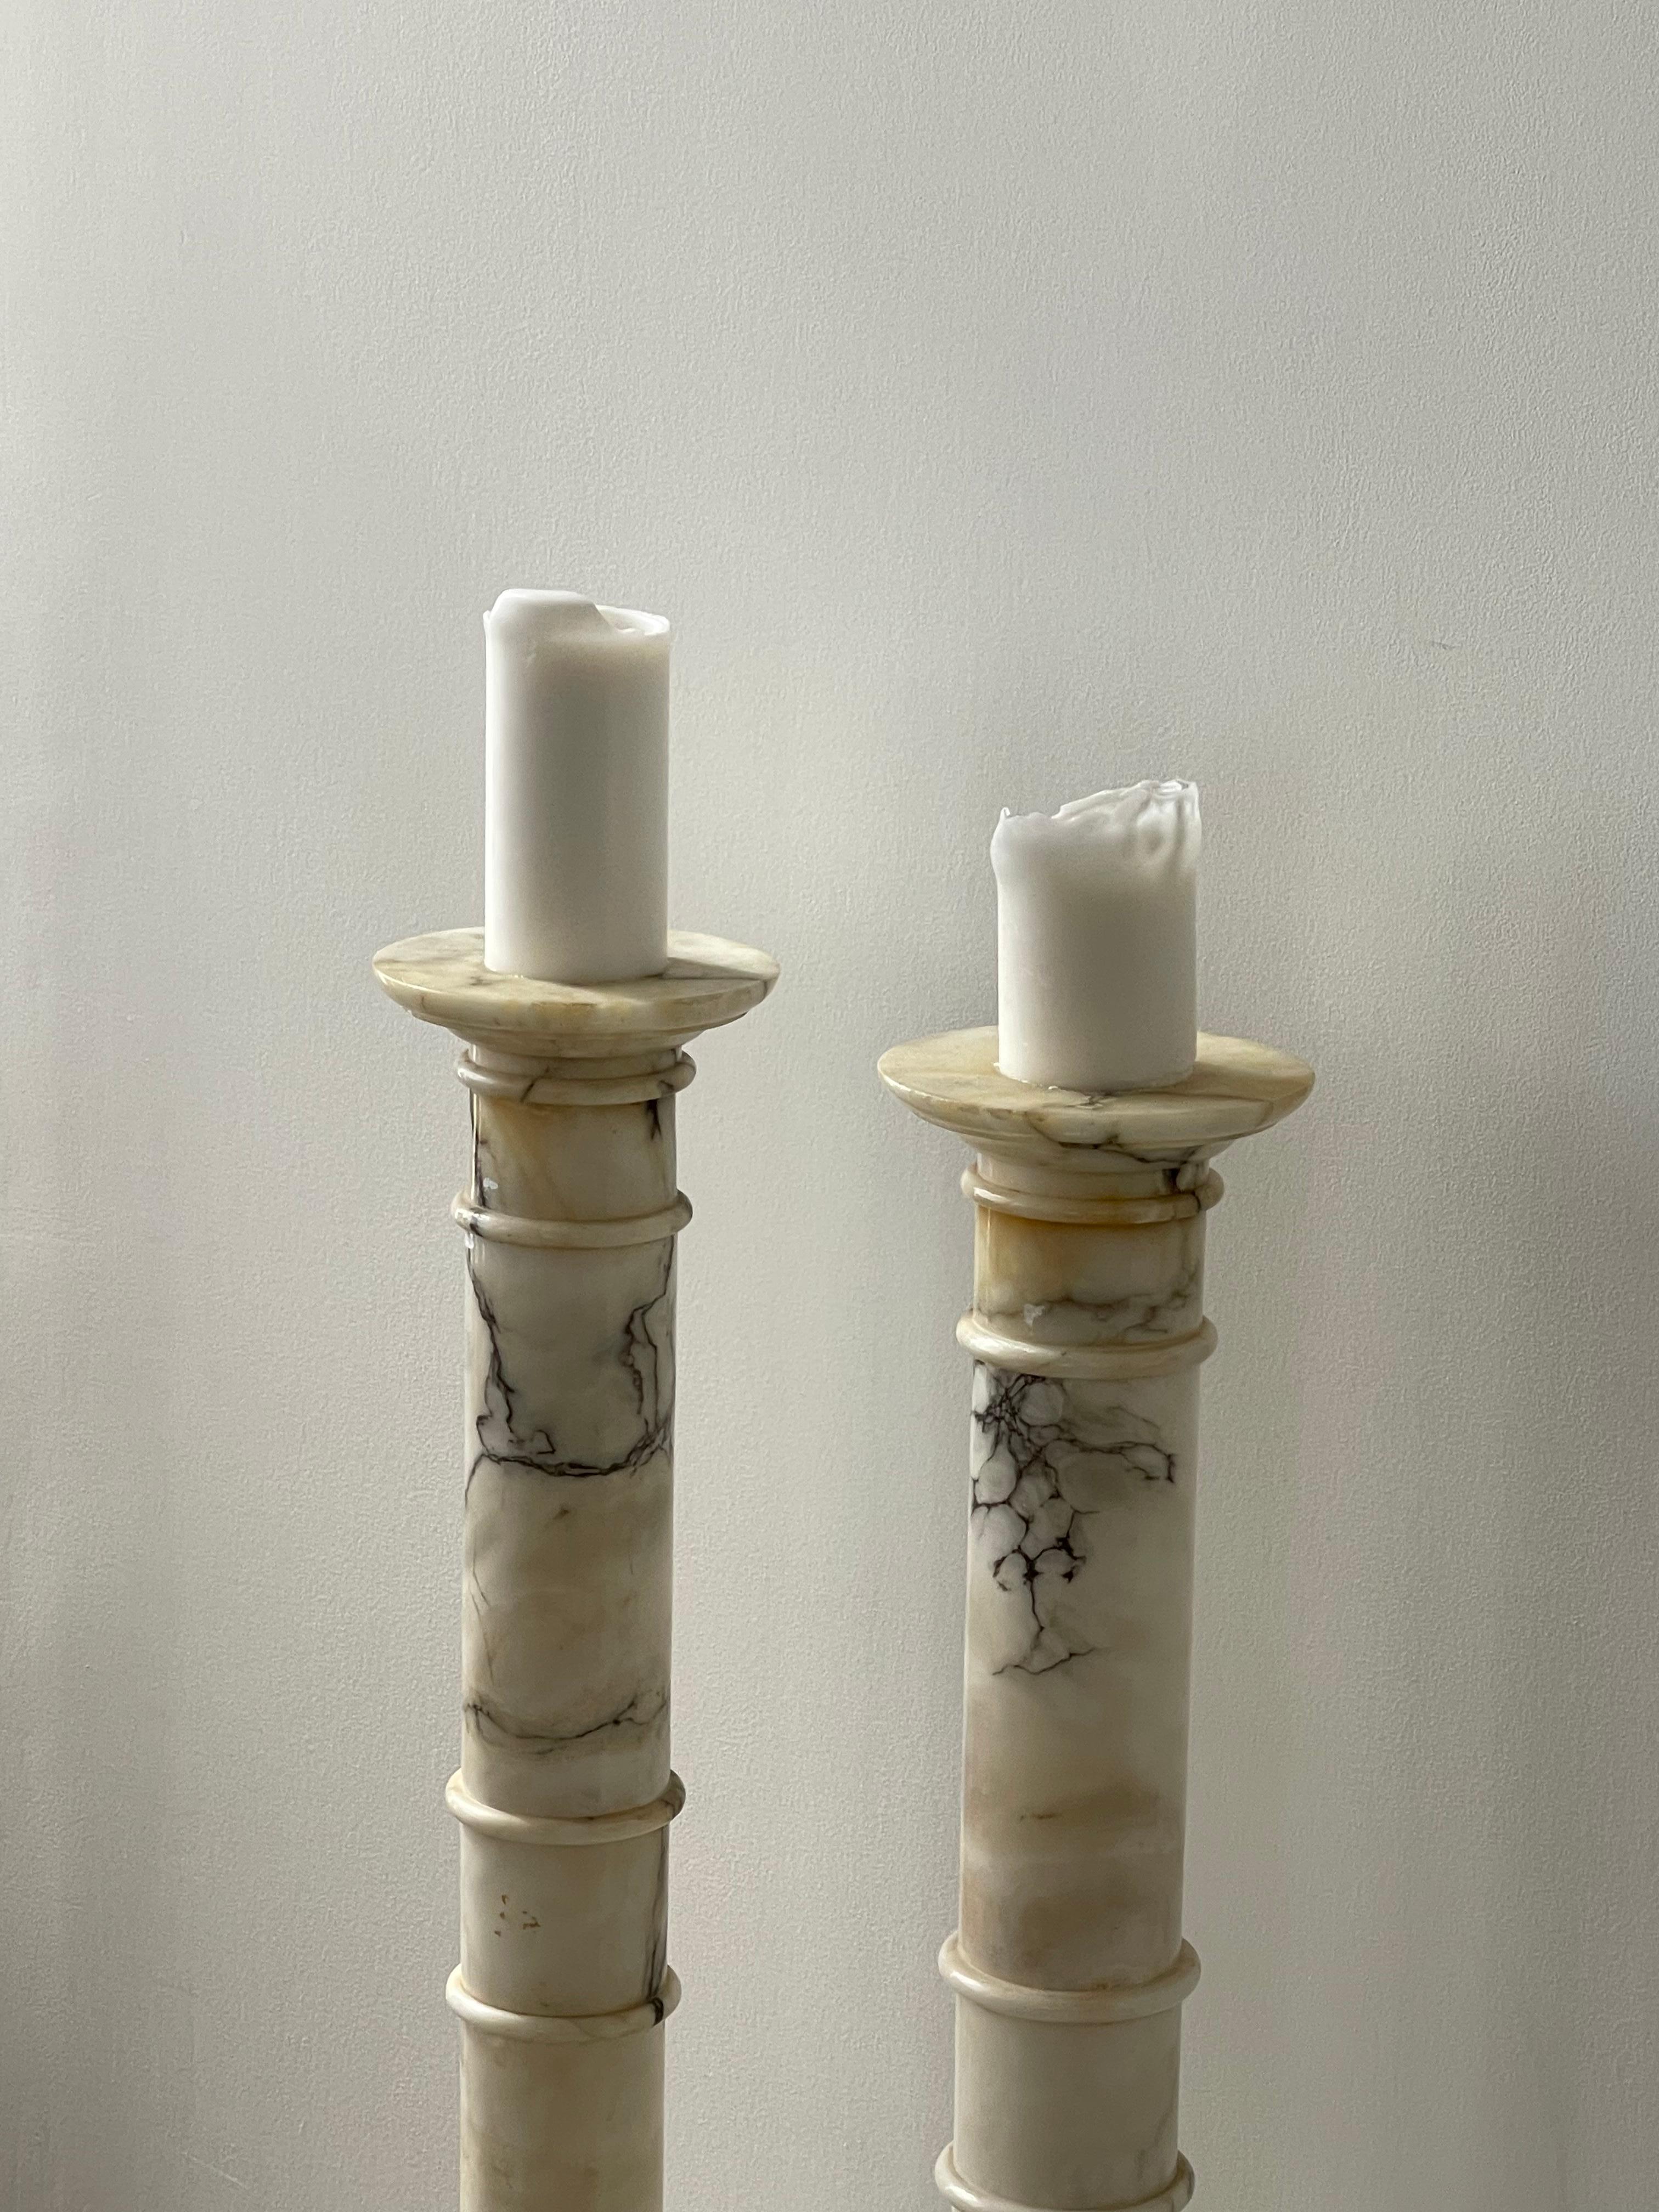 Mid-20th century white marble columns perfect for any type of display. We use them as amazing candlestick holders but can be used as pedestals. Beautiful veins and classical design. Sold individually.

Dimensions:
10